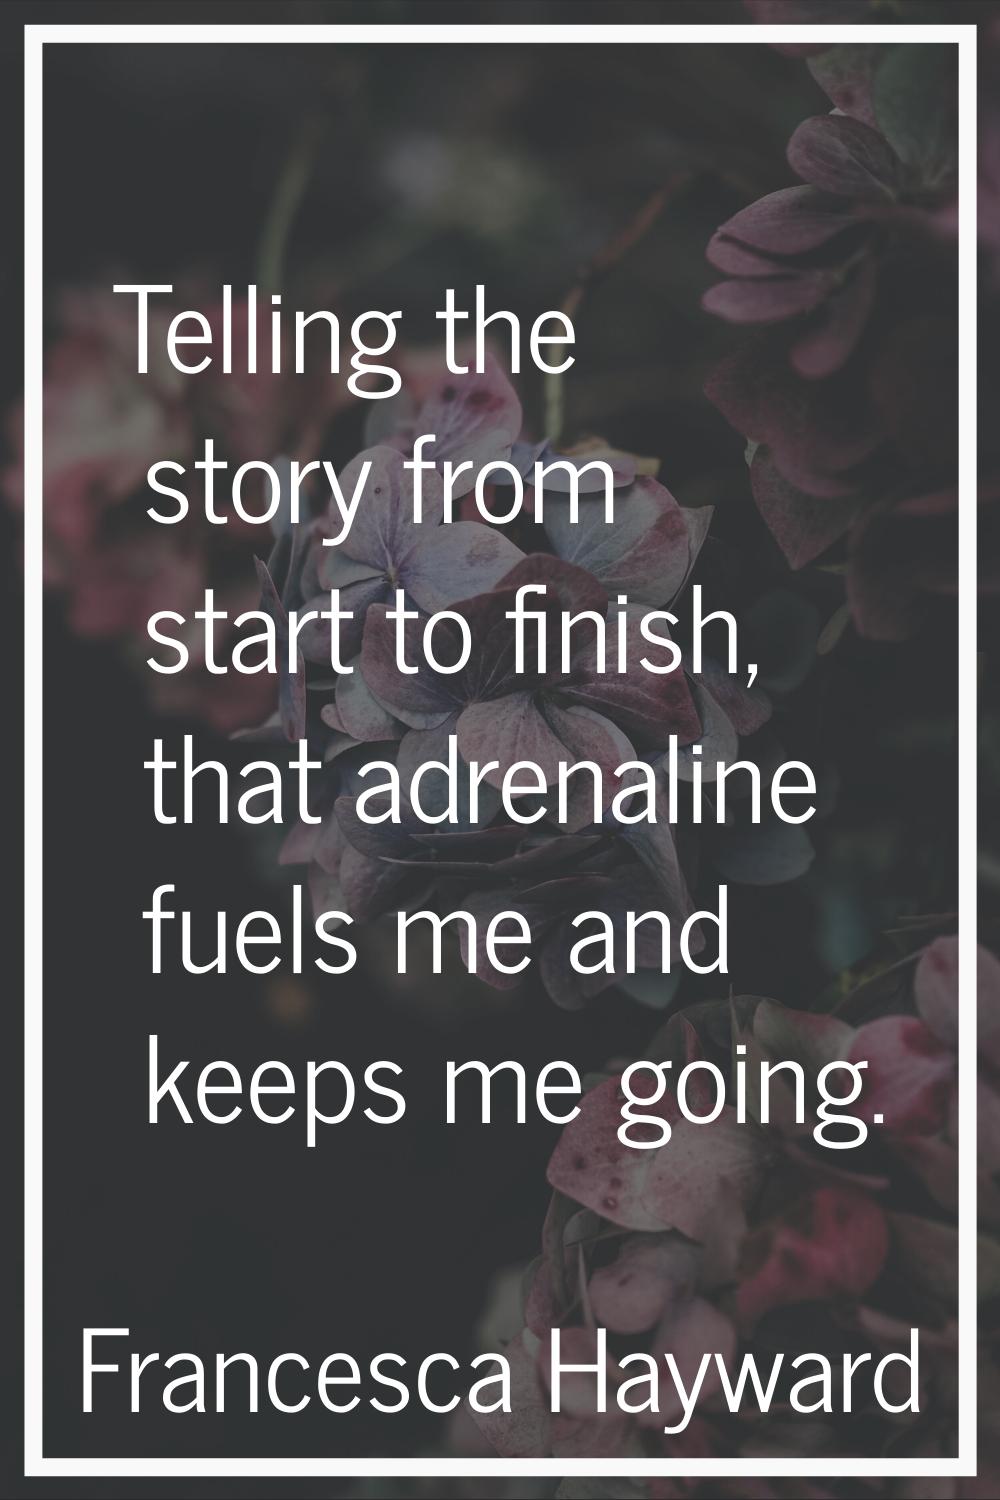 Telling the story from start to finish, that adrenaline fuels me and keeps me going.